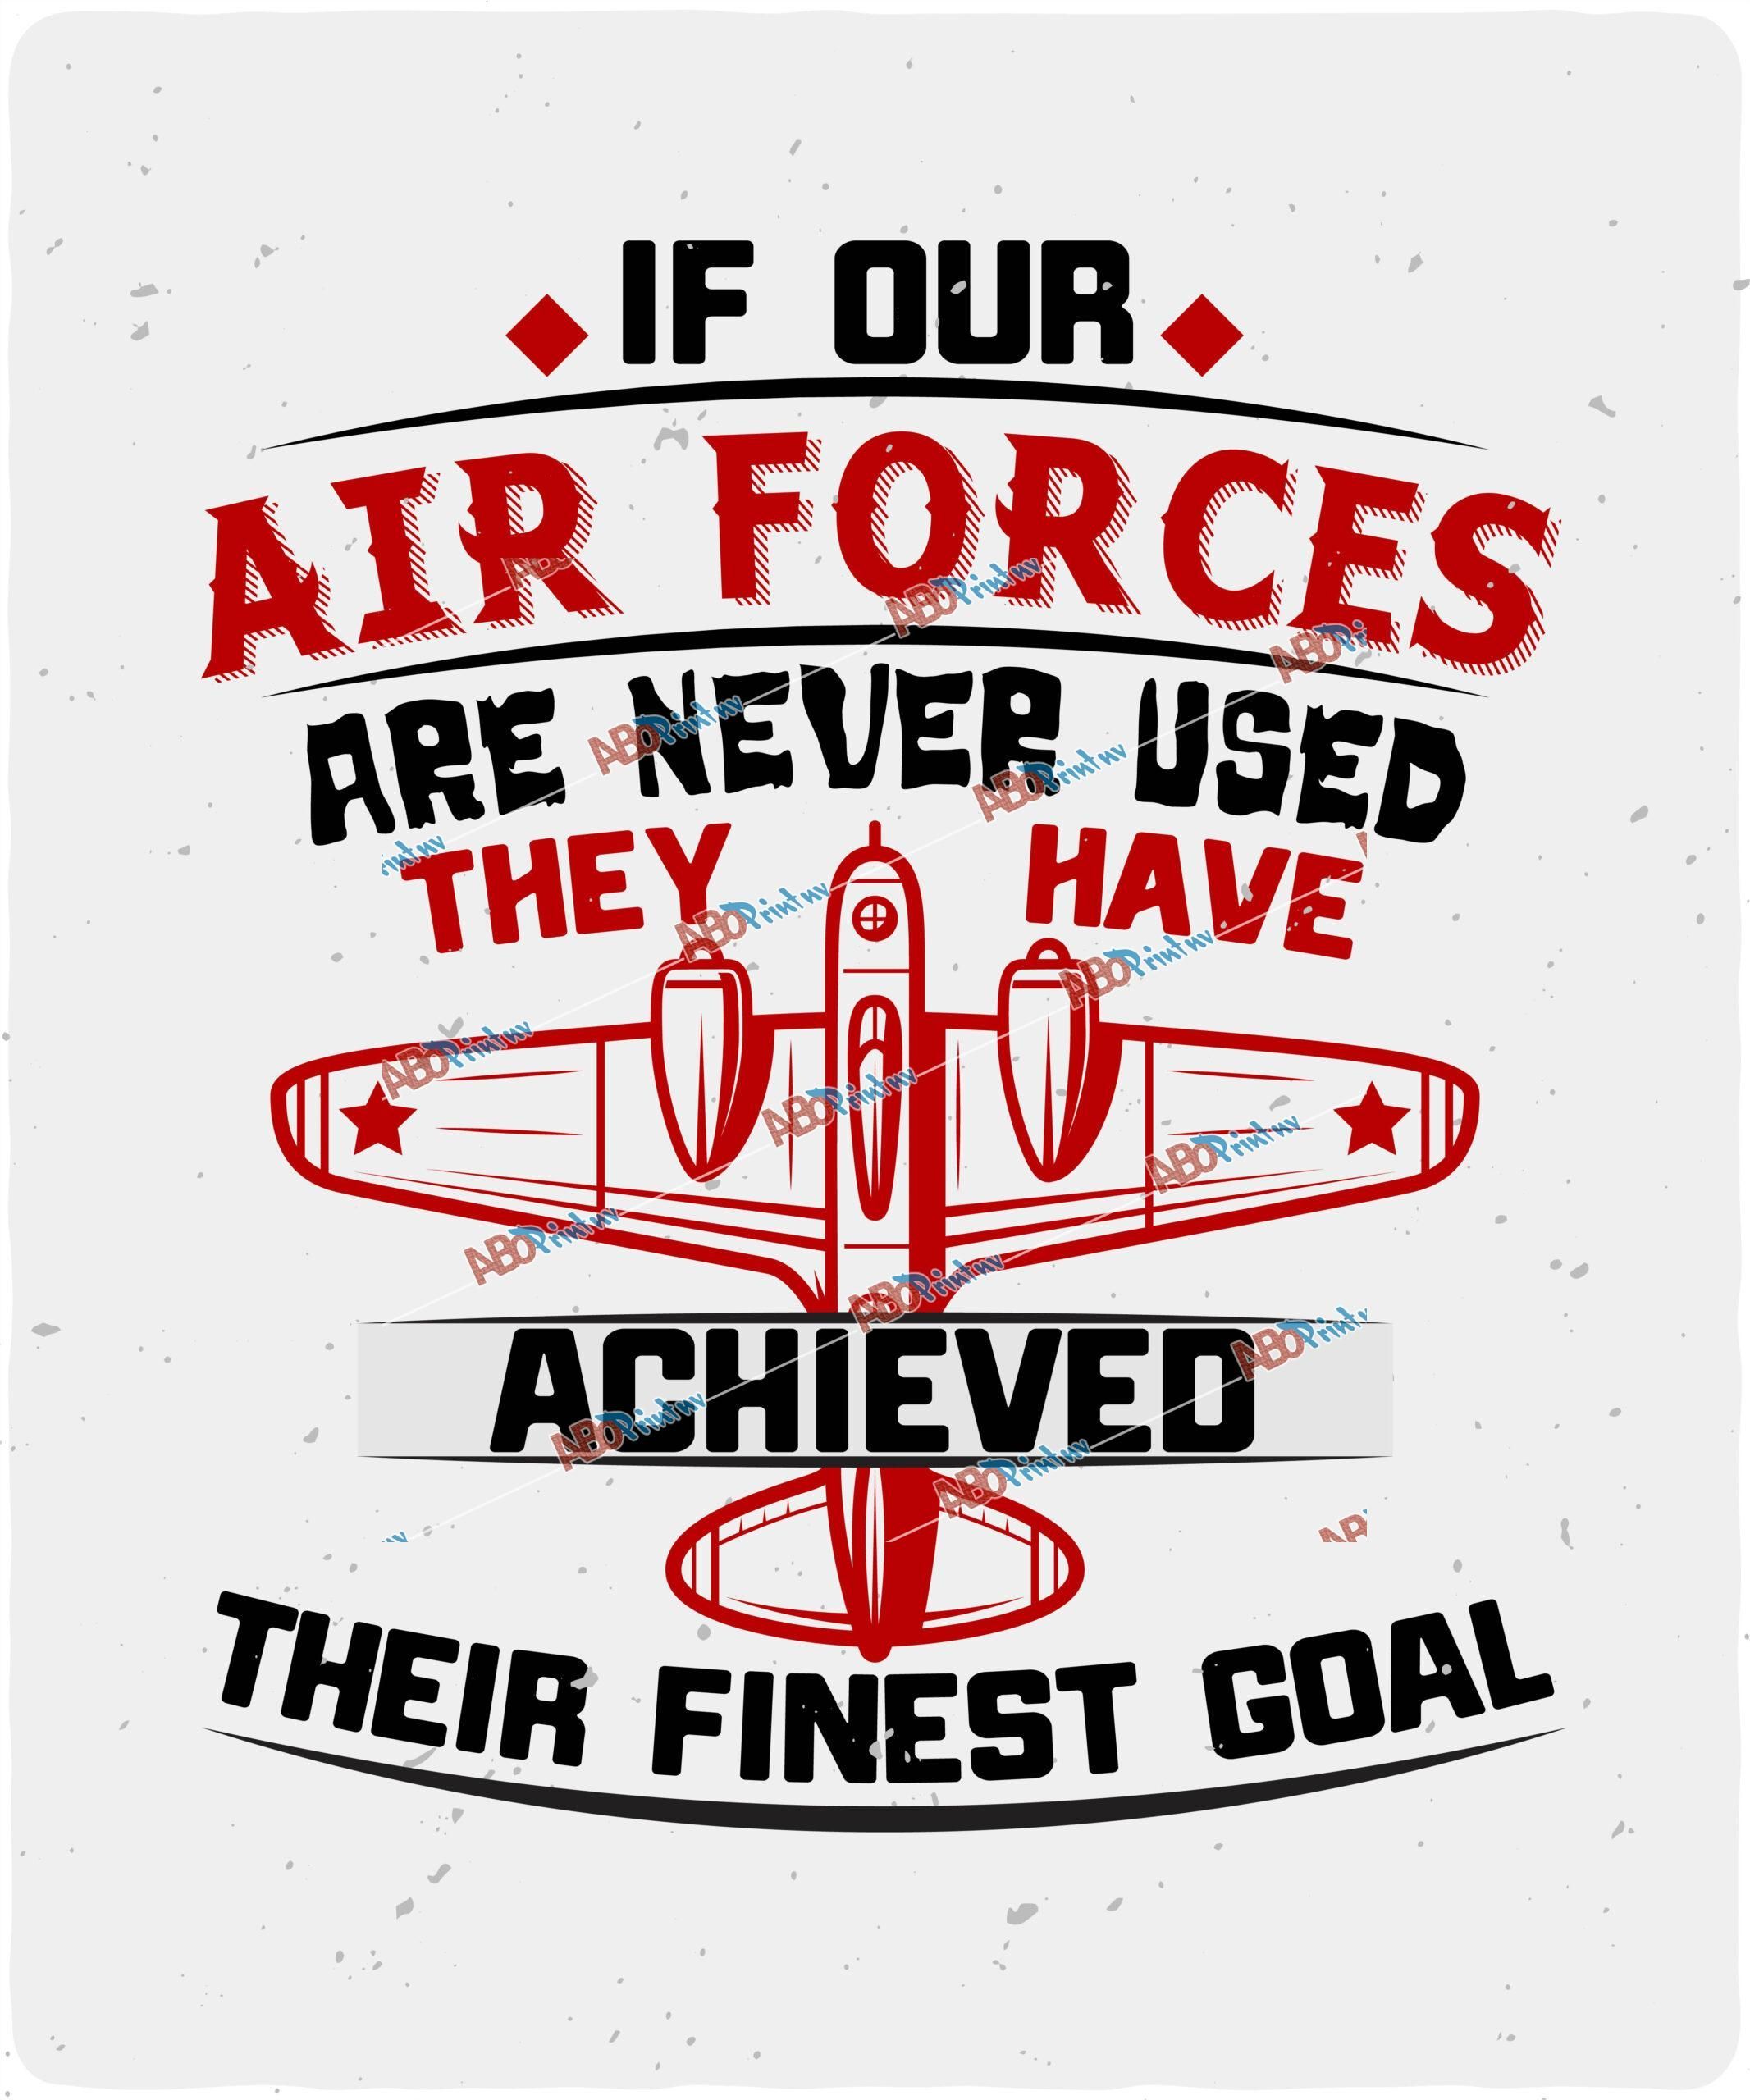 If our Air Forces are never used, they have achieved their finest goal